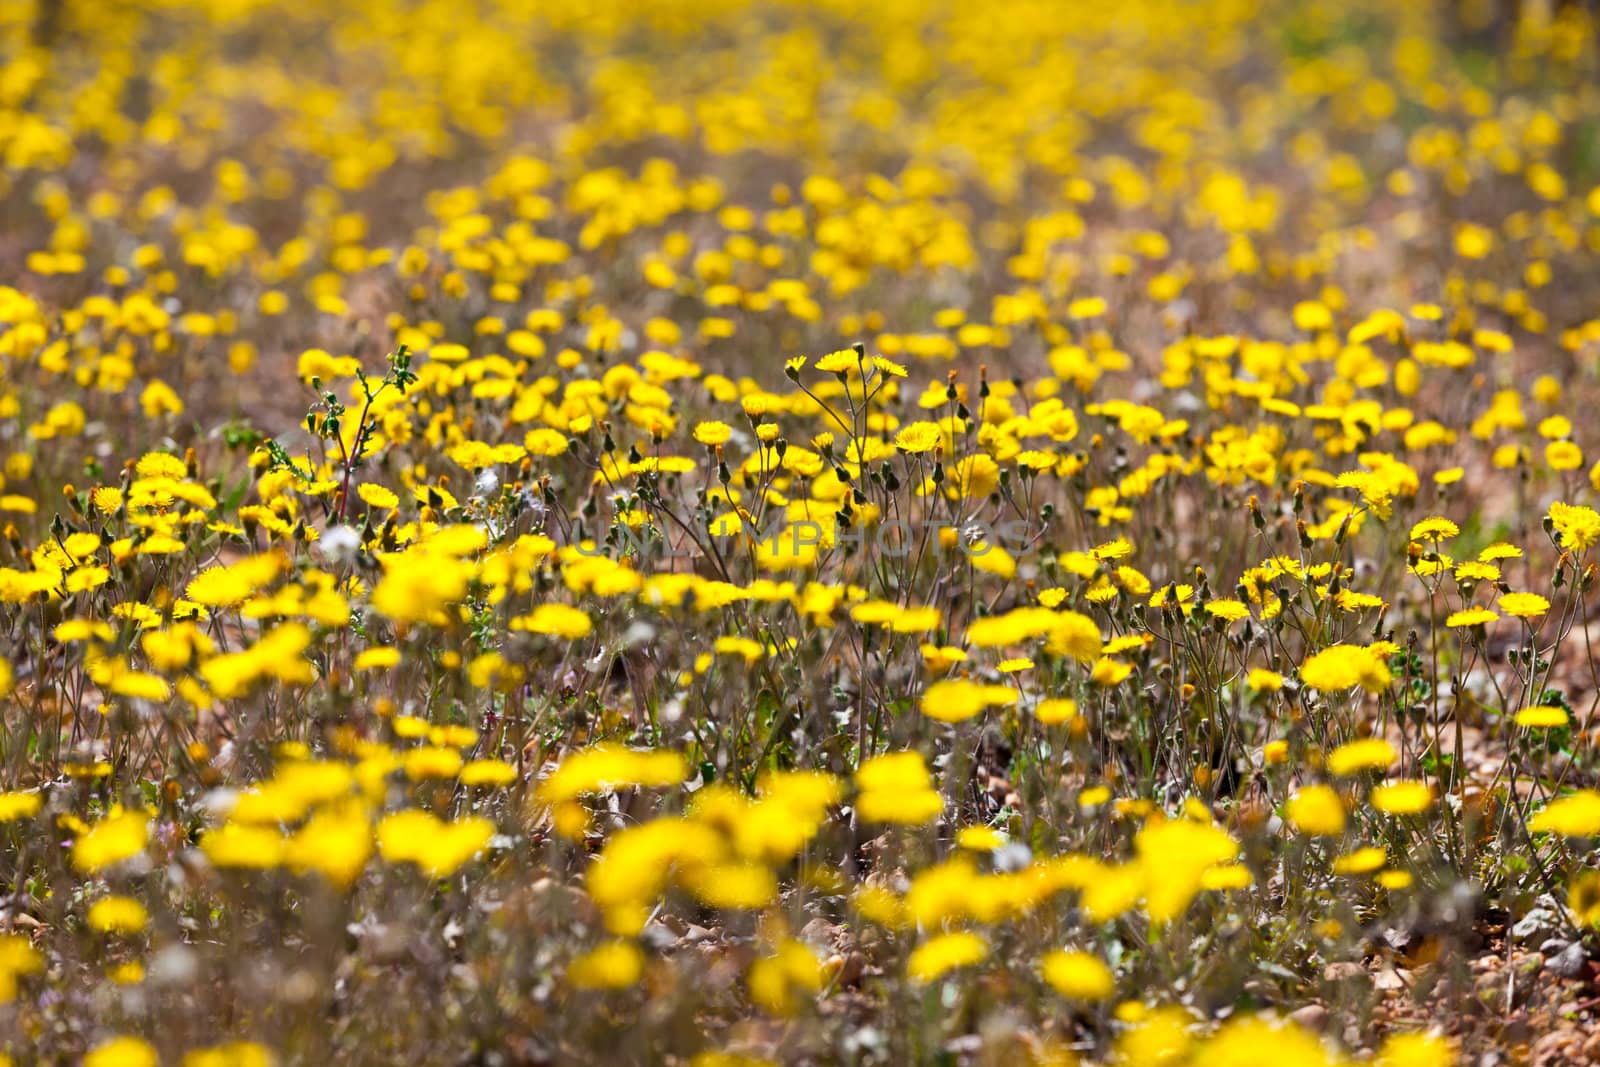 Field of yellow flowers, closeup background